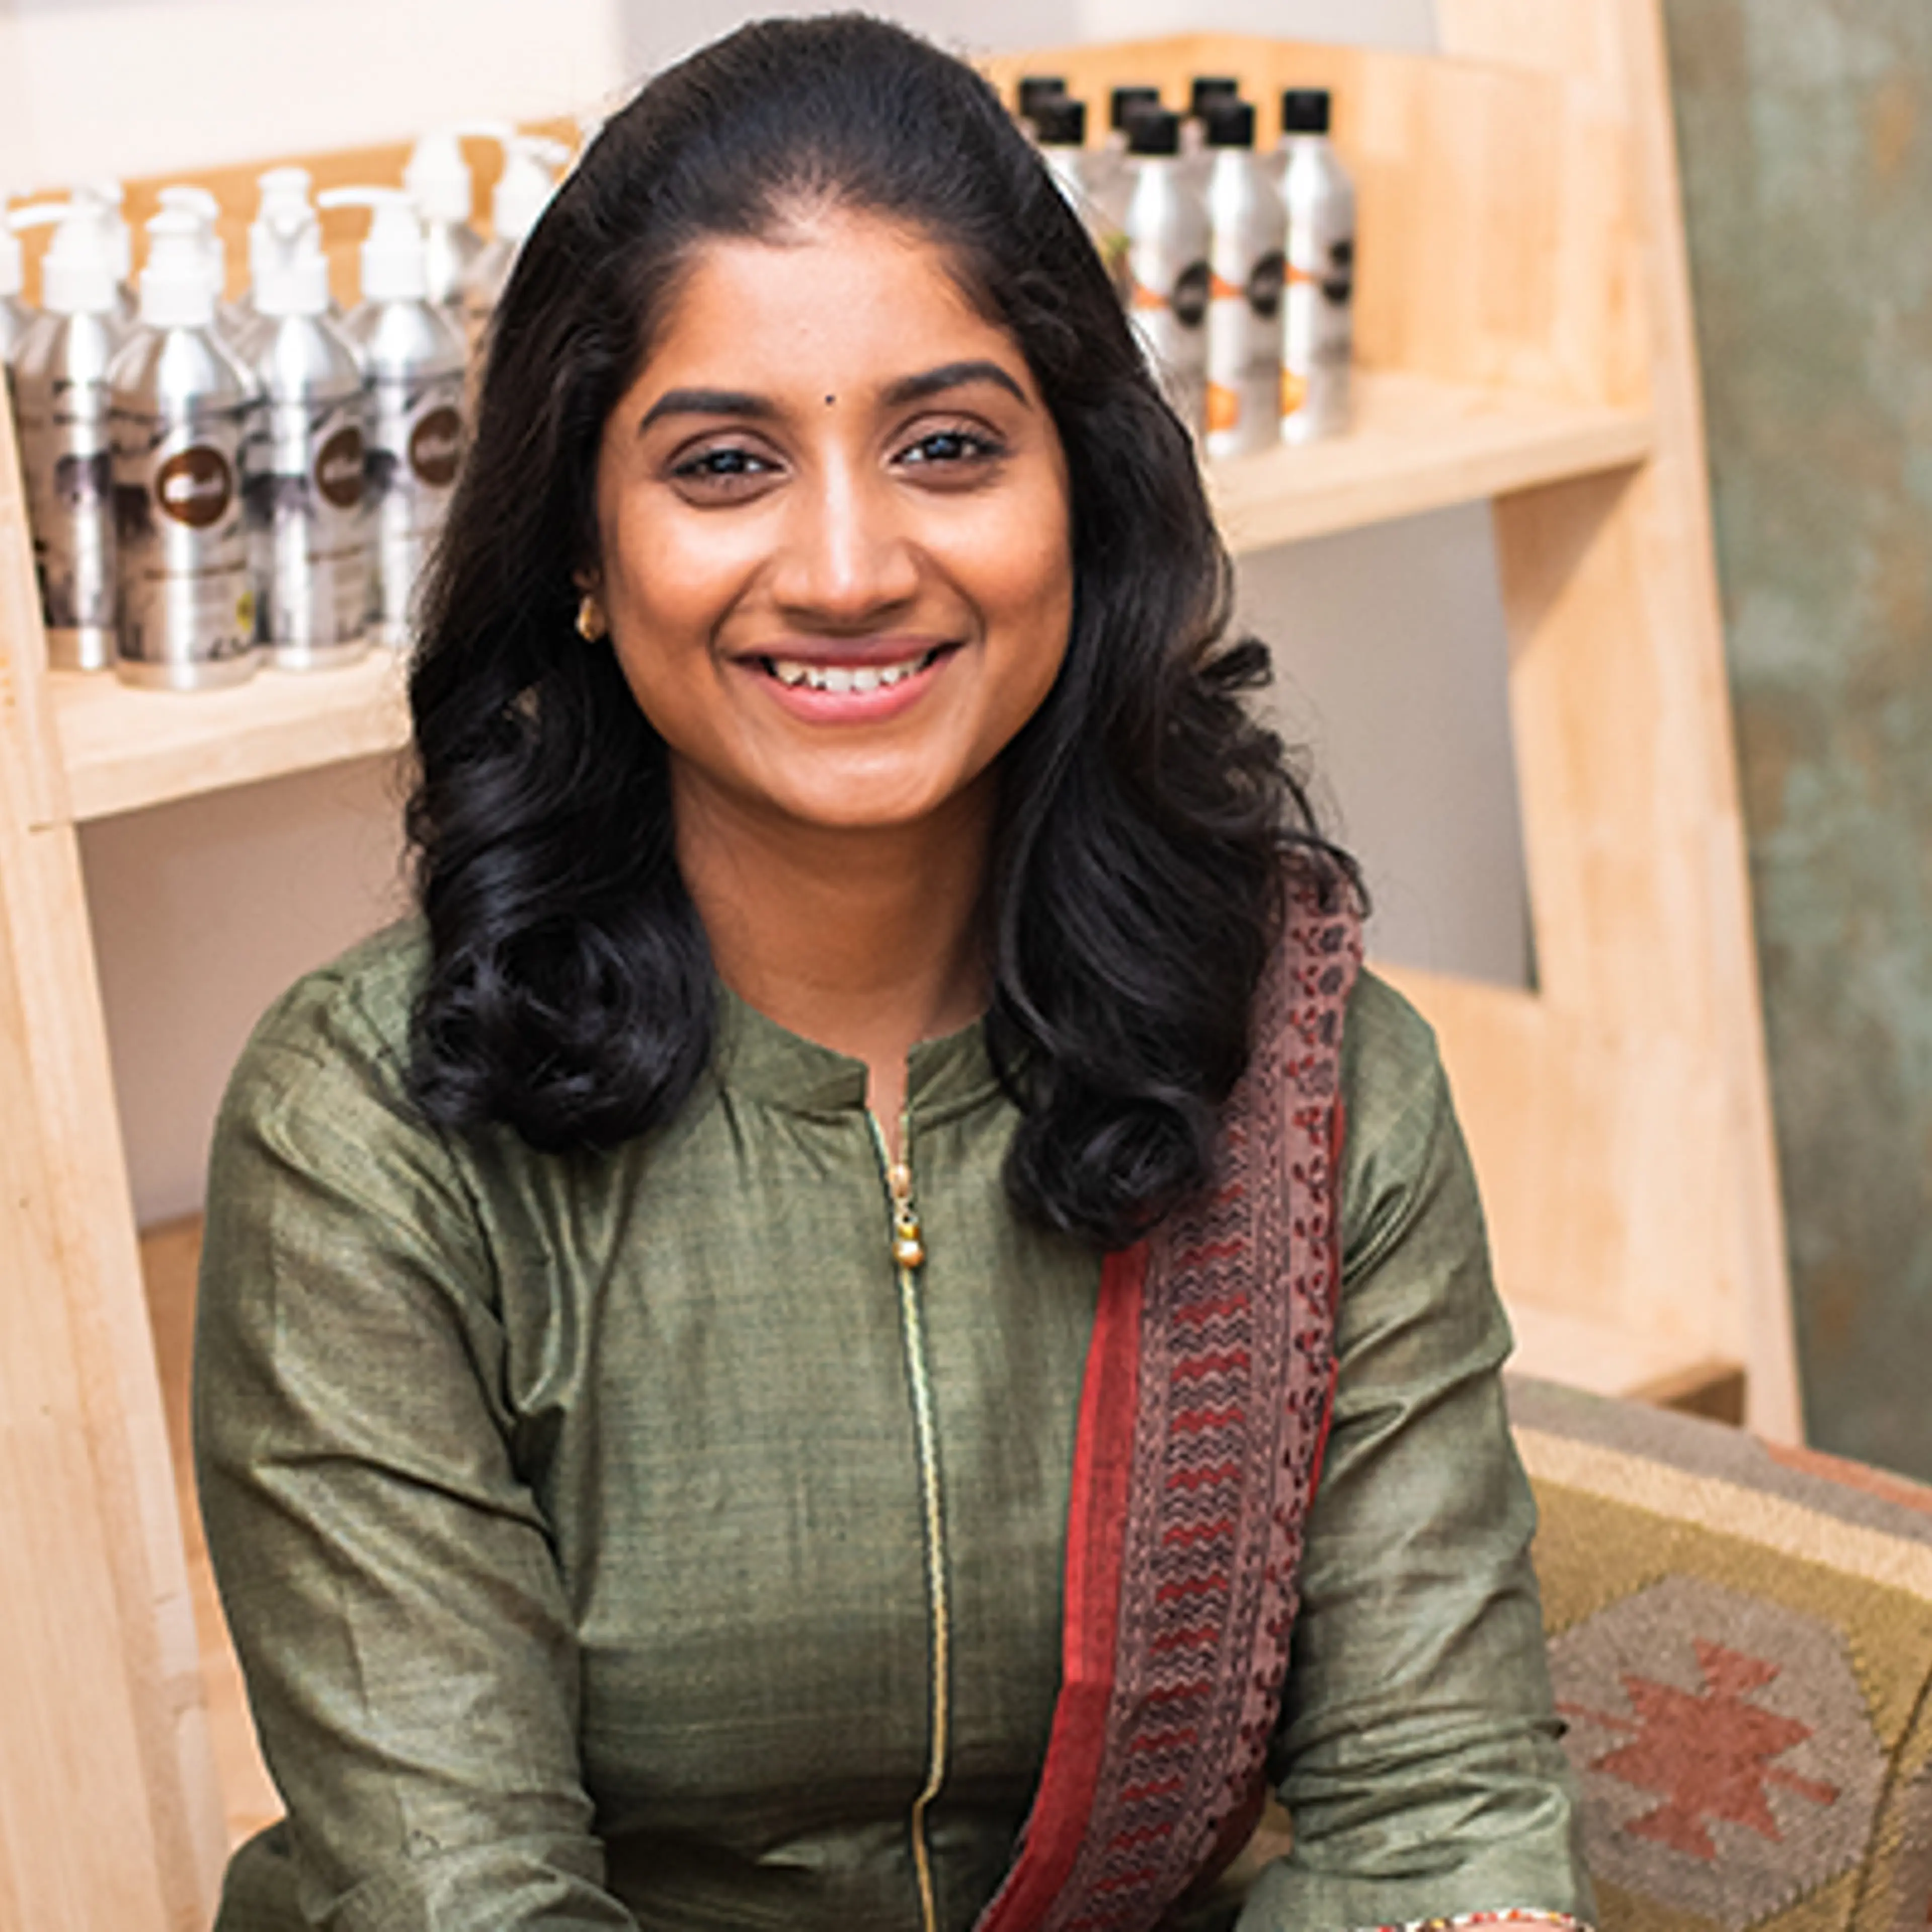 [Startup Bharat] After losing her mother, this engineer built a Rs 15 Cr organic skincare brand